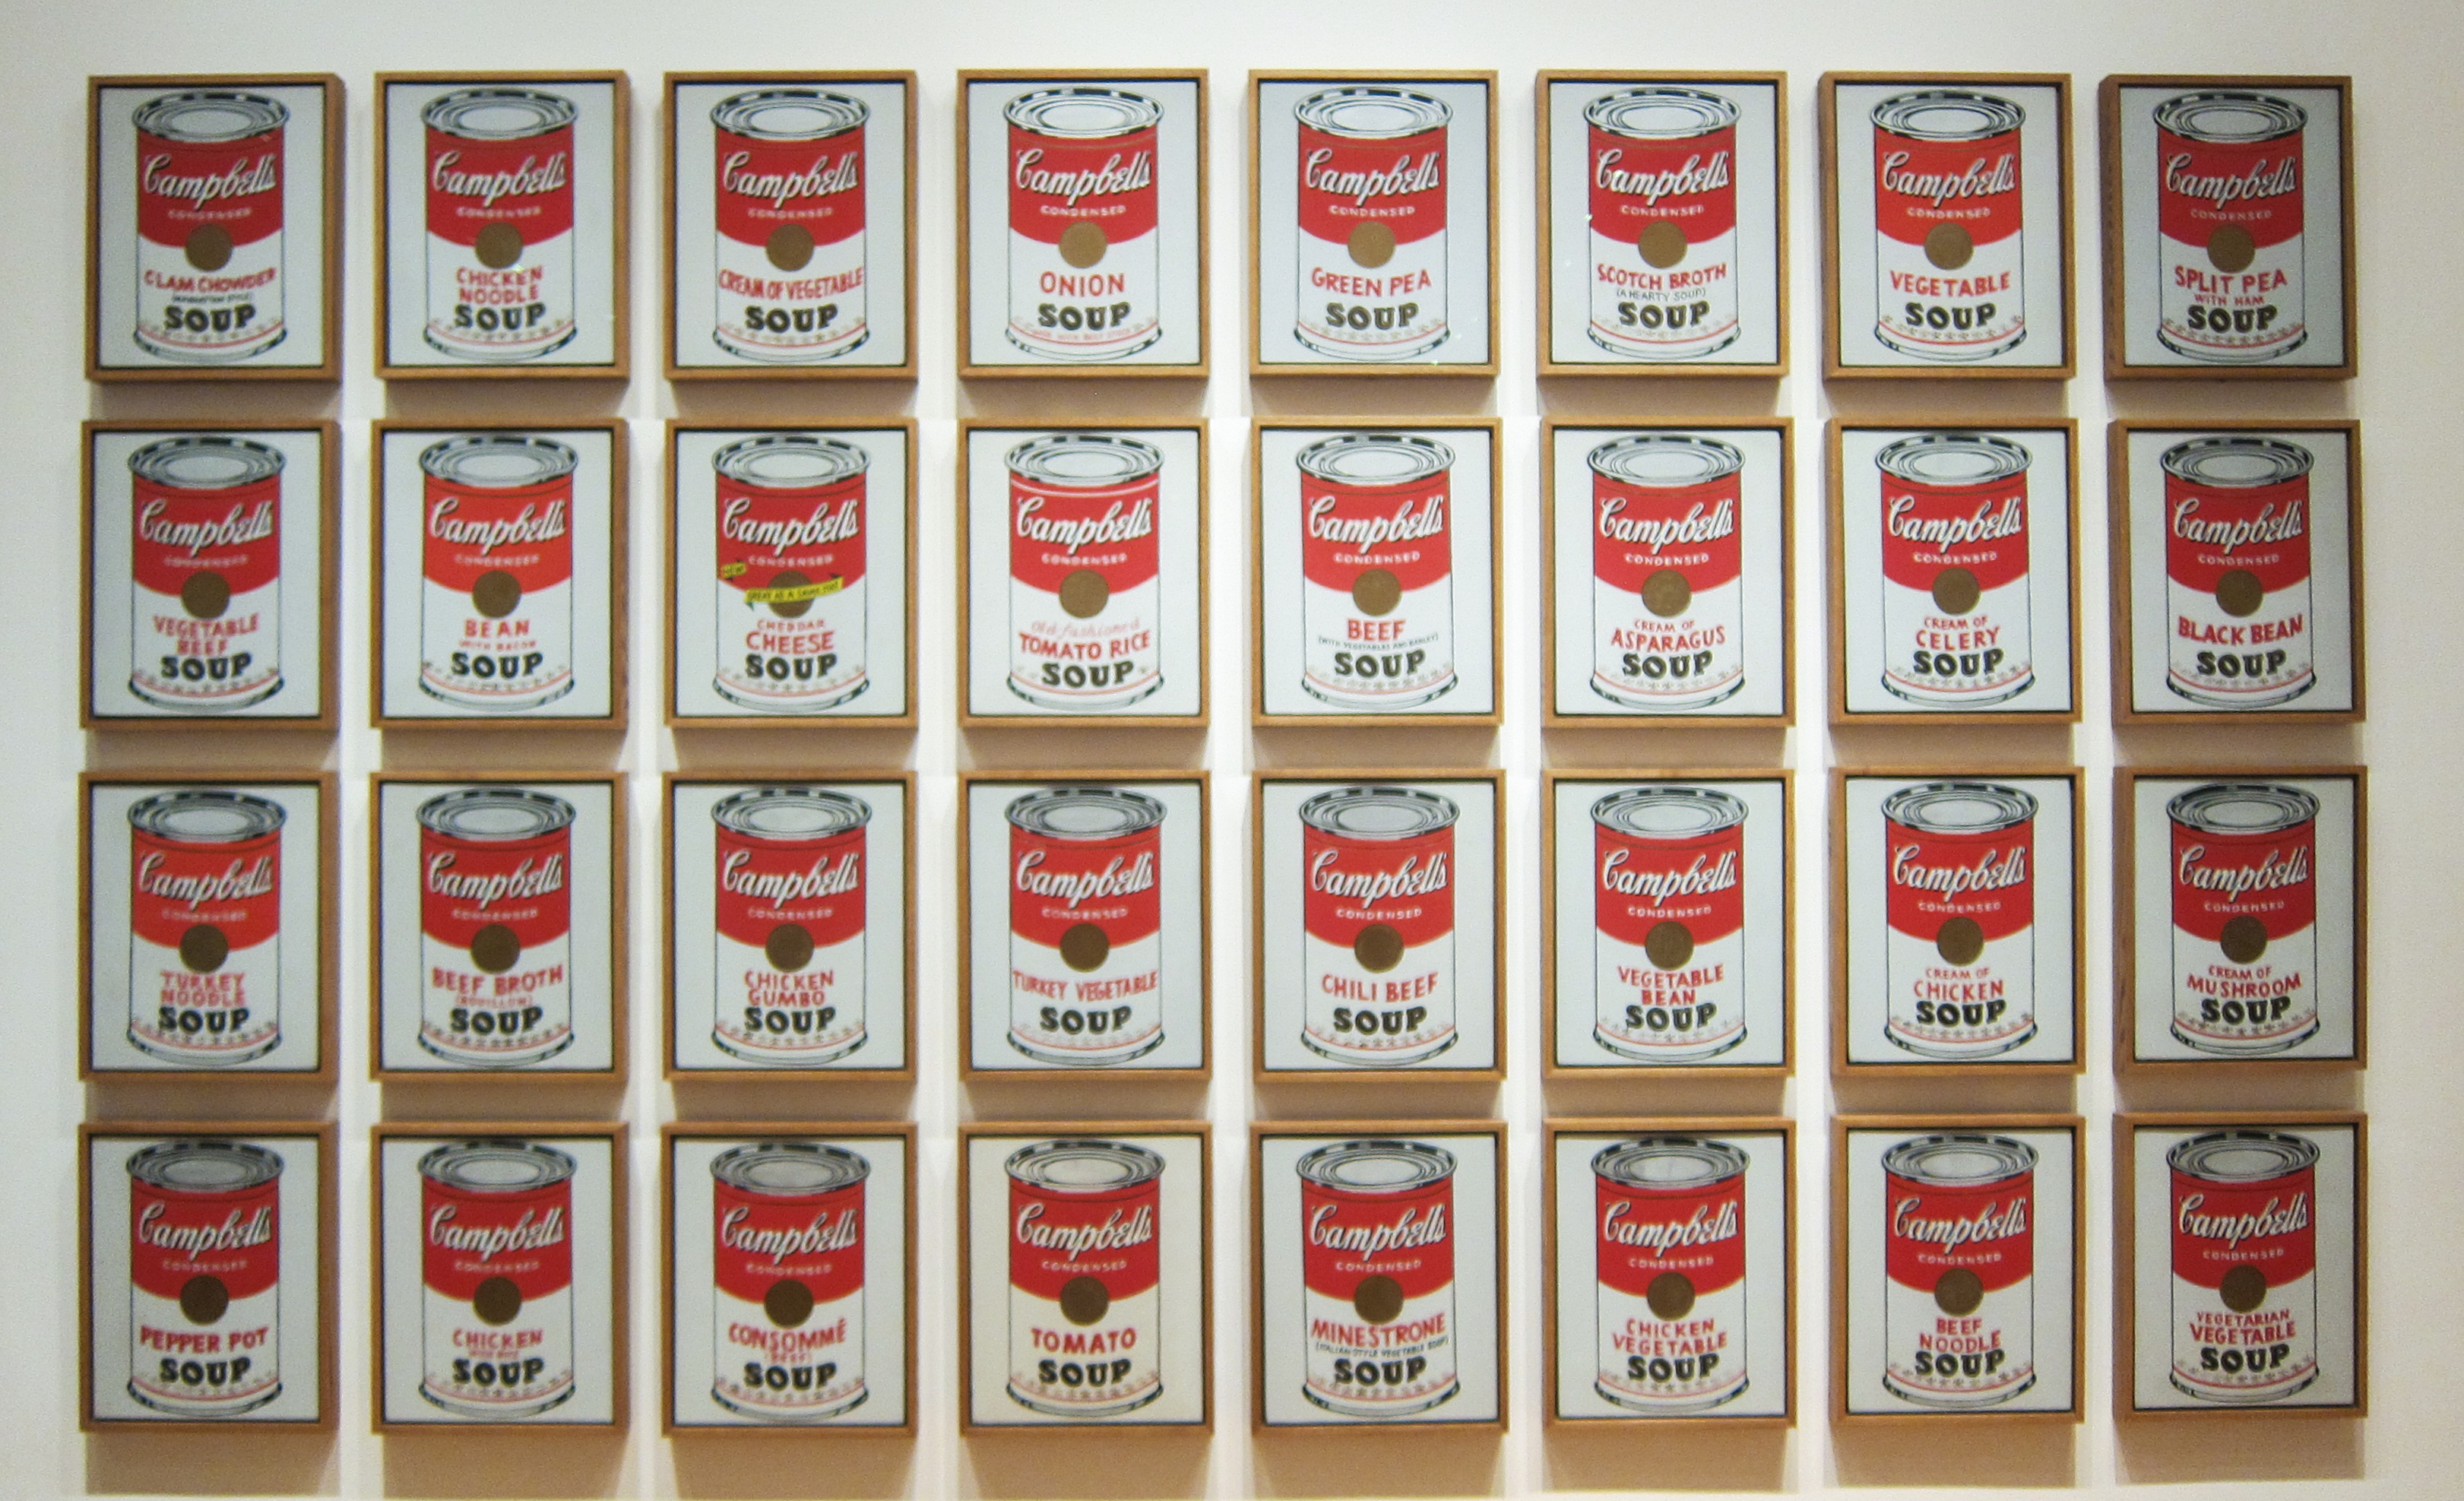 Andy Warhol, Campbell's Soup Cans, 1962